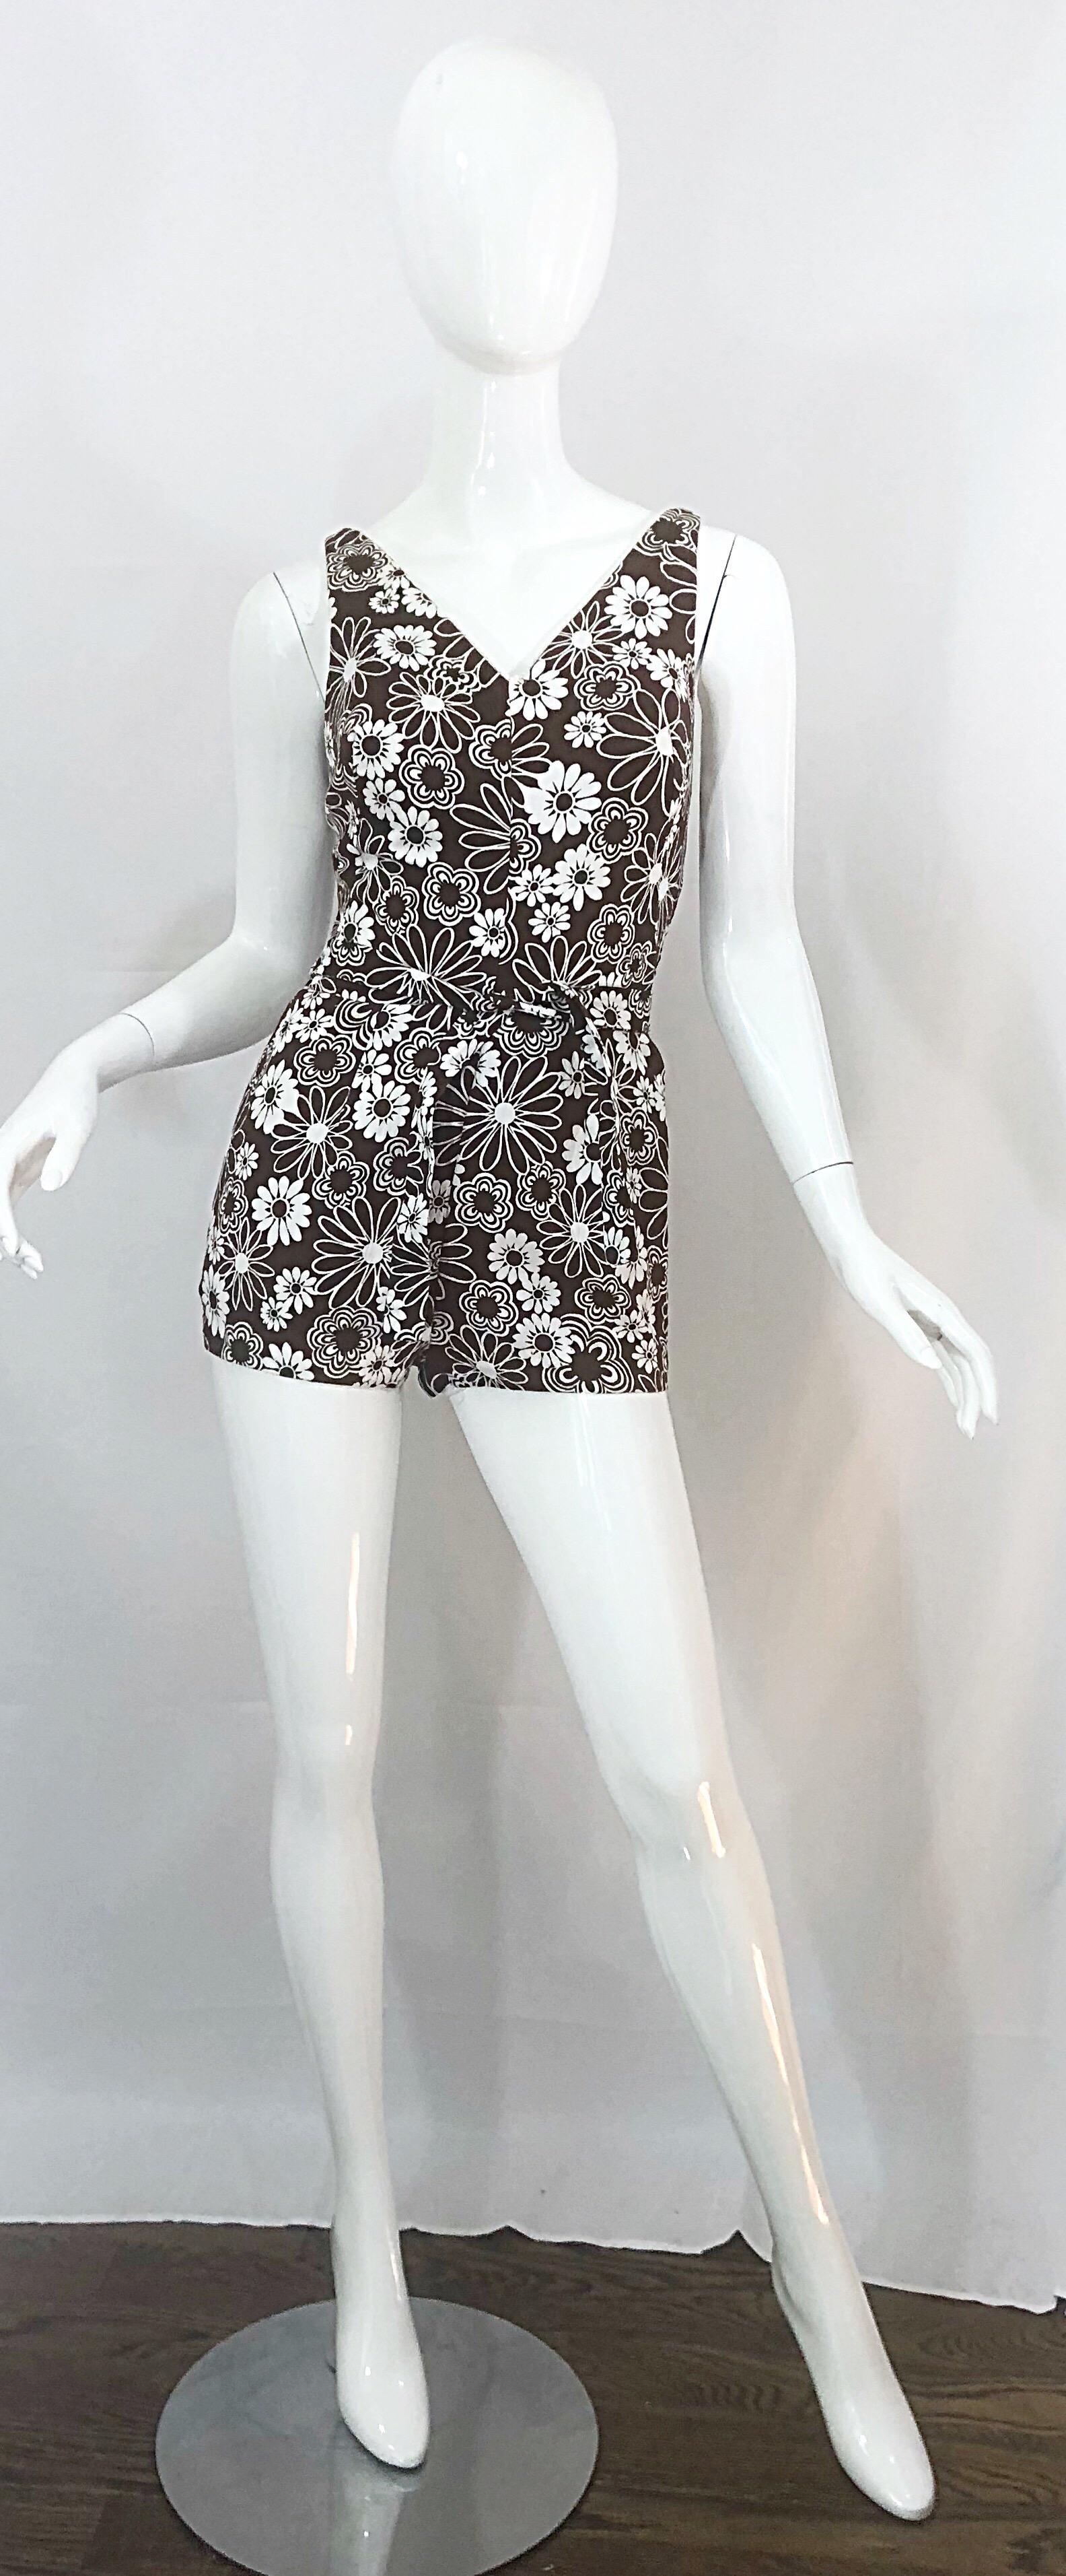 Chic 1960s brown and white flower print one piece belted romper swimsuit! Features white and brown daisy flowers printed throughout. Belt ties at side waist. Adjustable buttons at each top strap to adjust for size / height. The perfect timeless